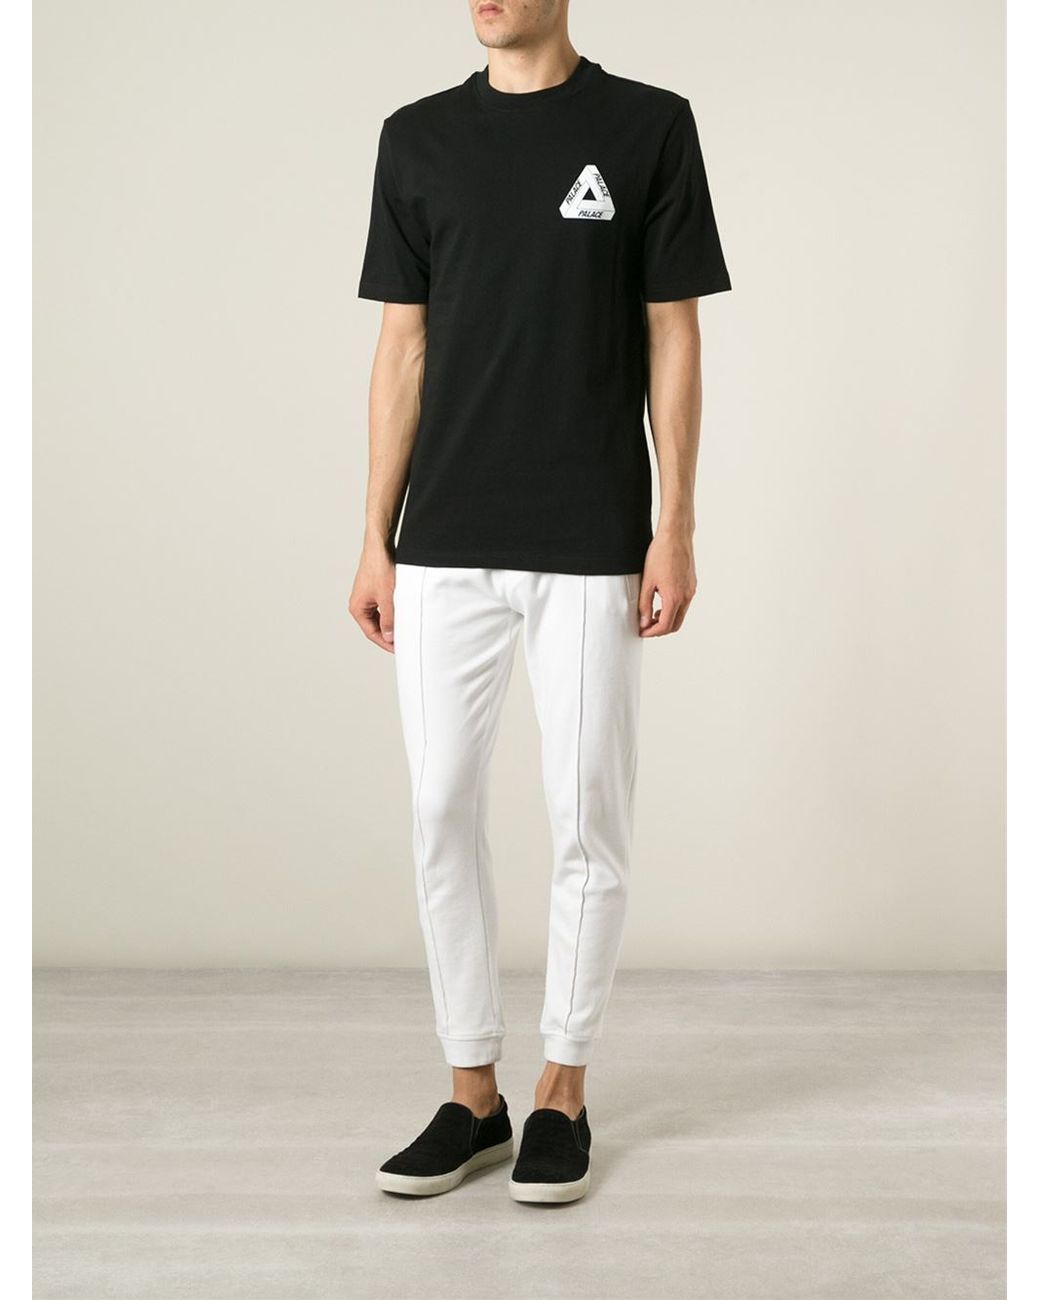 Palace Logo T-Shirt in Black for Men | Lyst